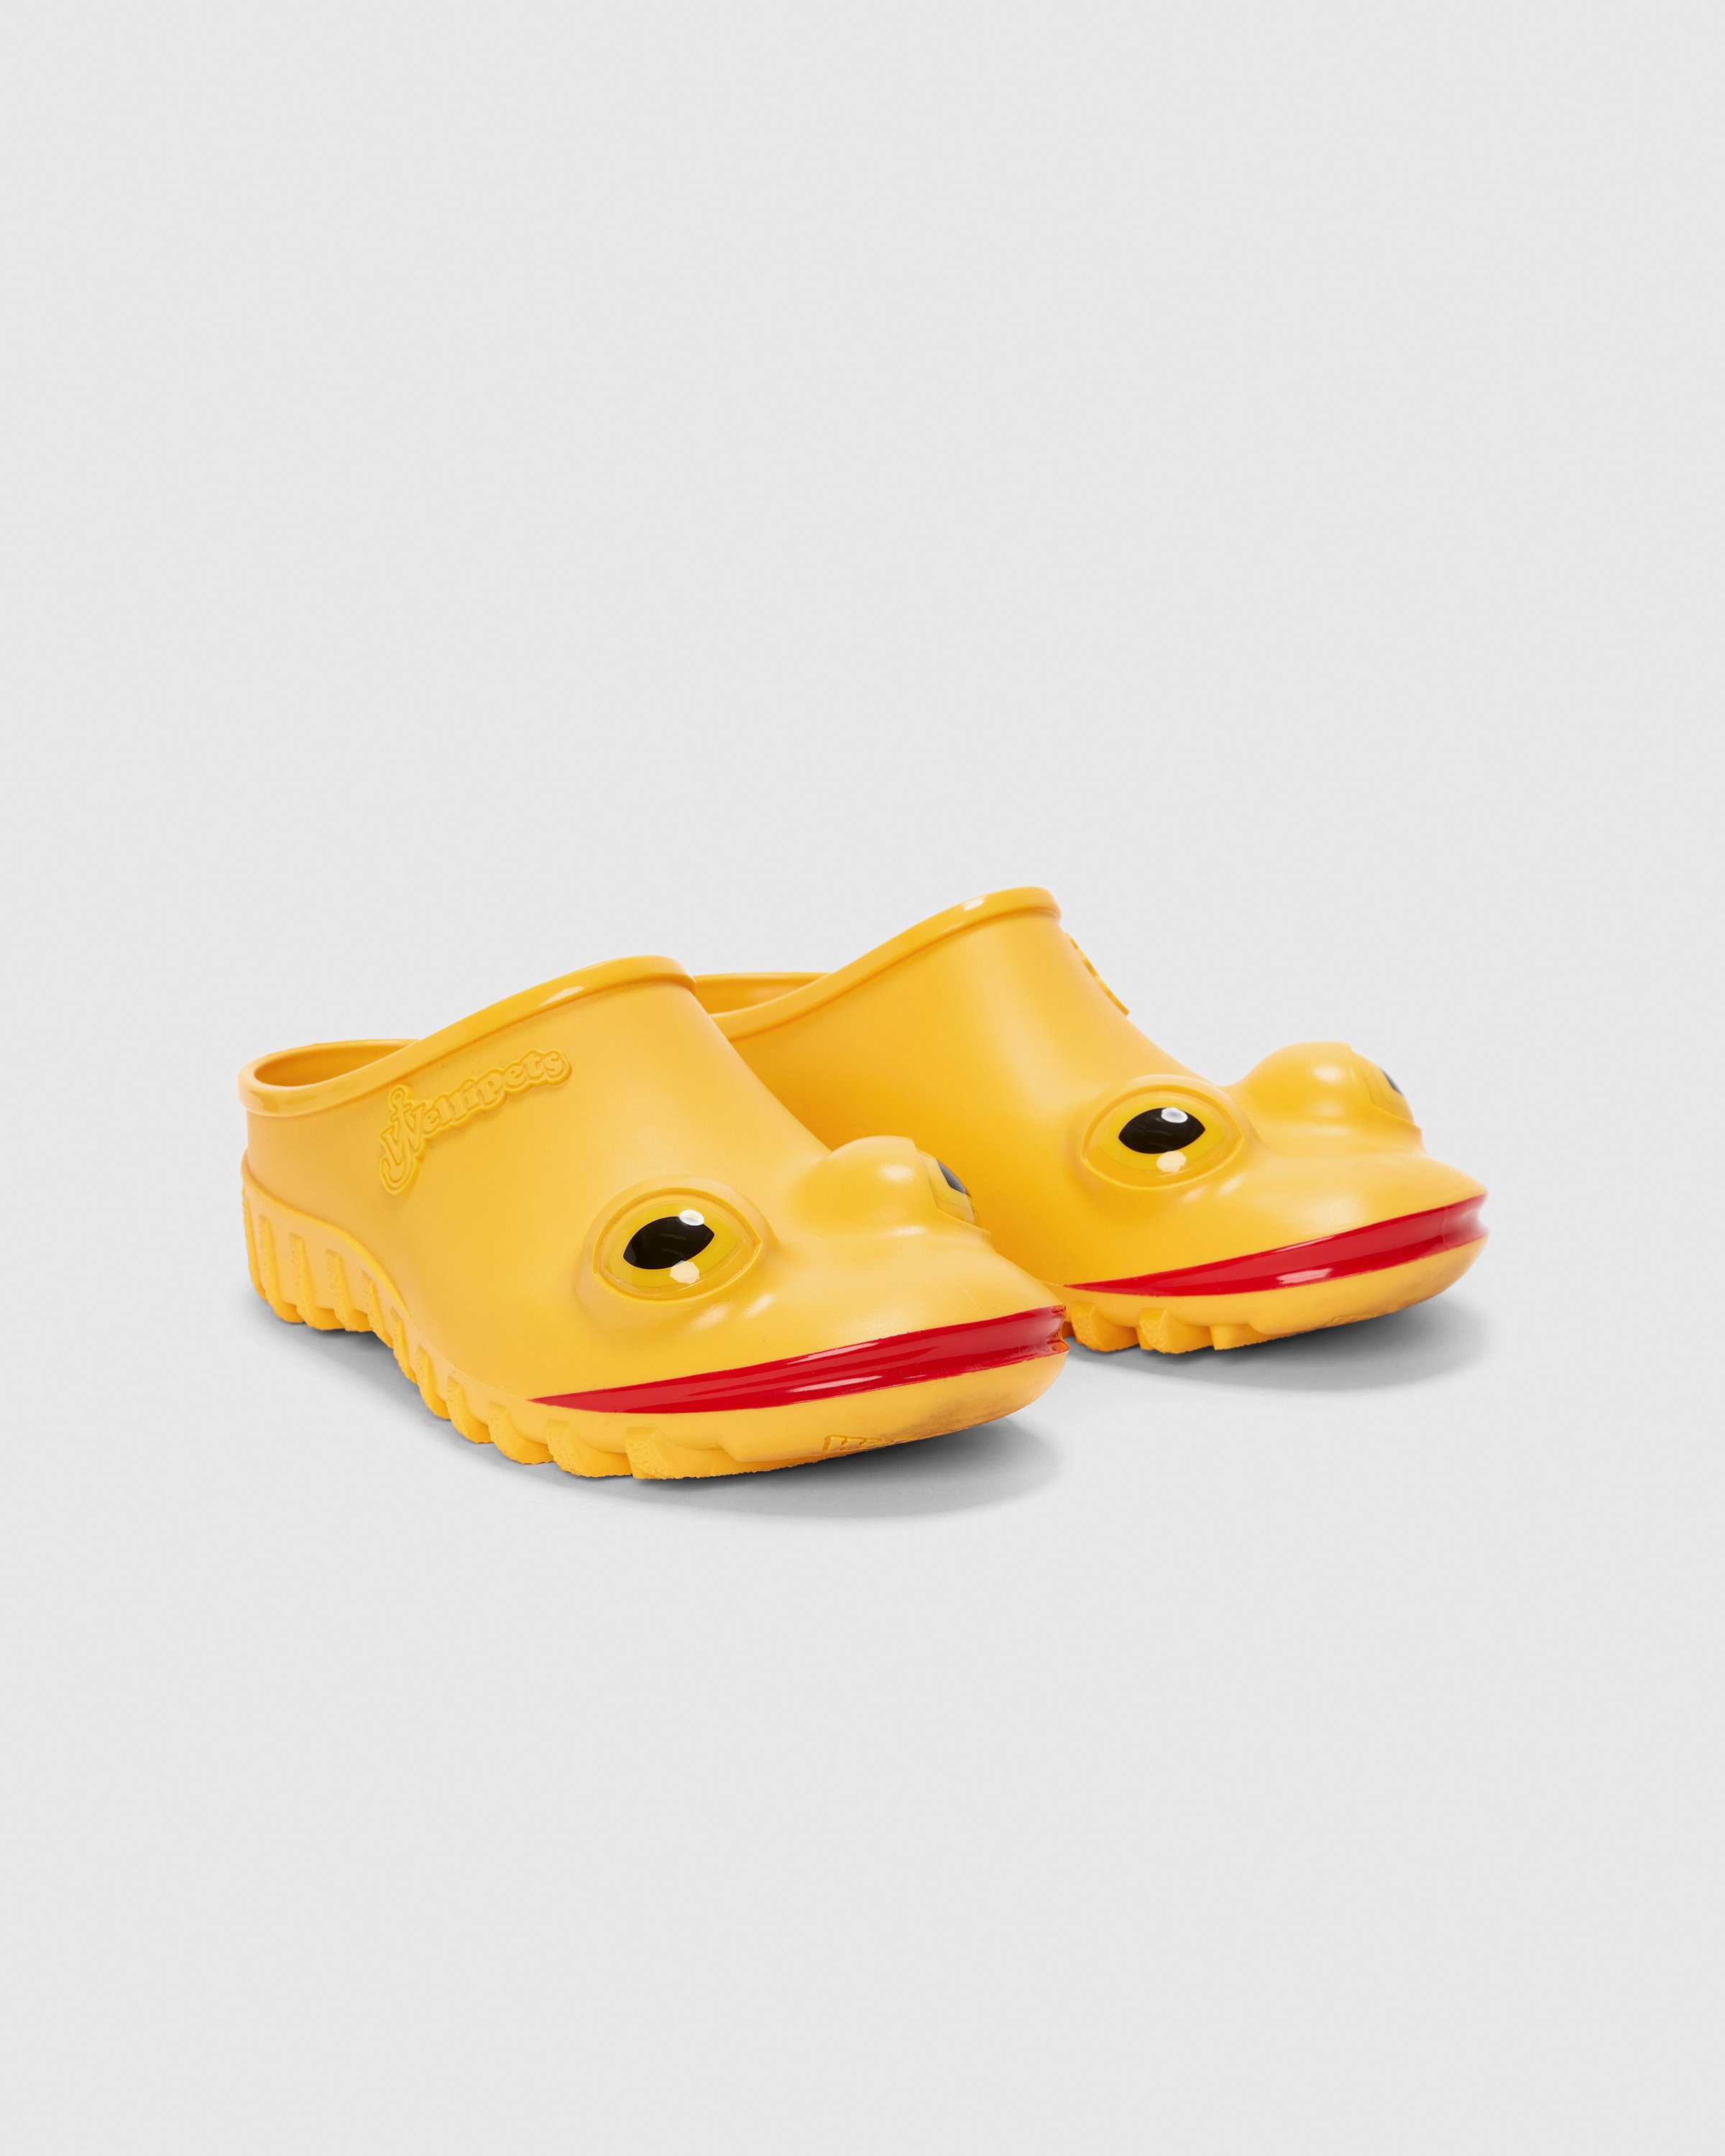 J.W. Anderson x Wellipets - Frog Loafer Yellow - Footwear - Yellow - Image 2